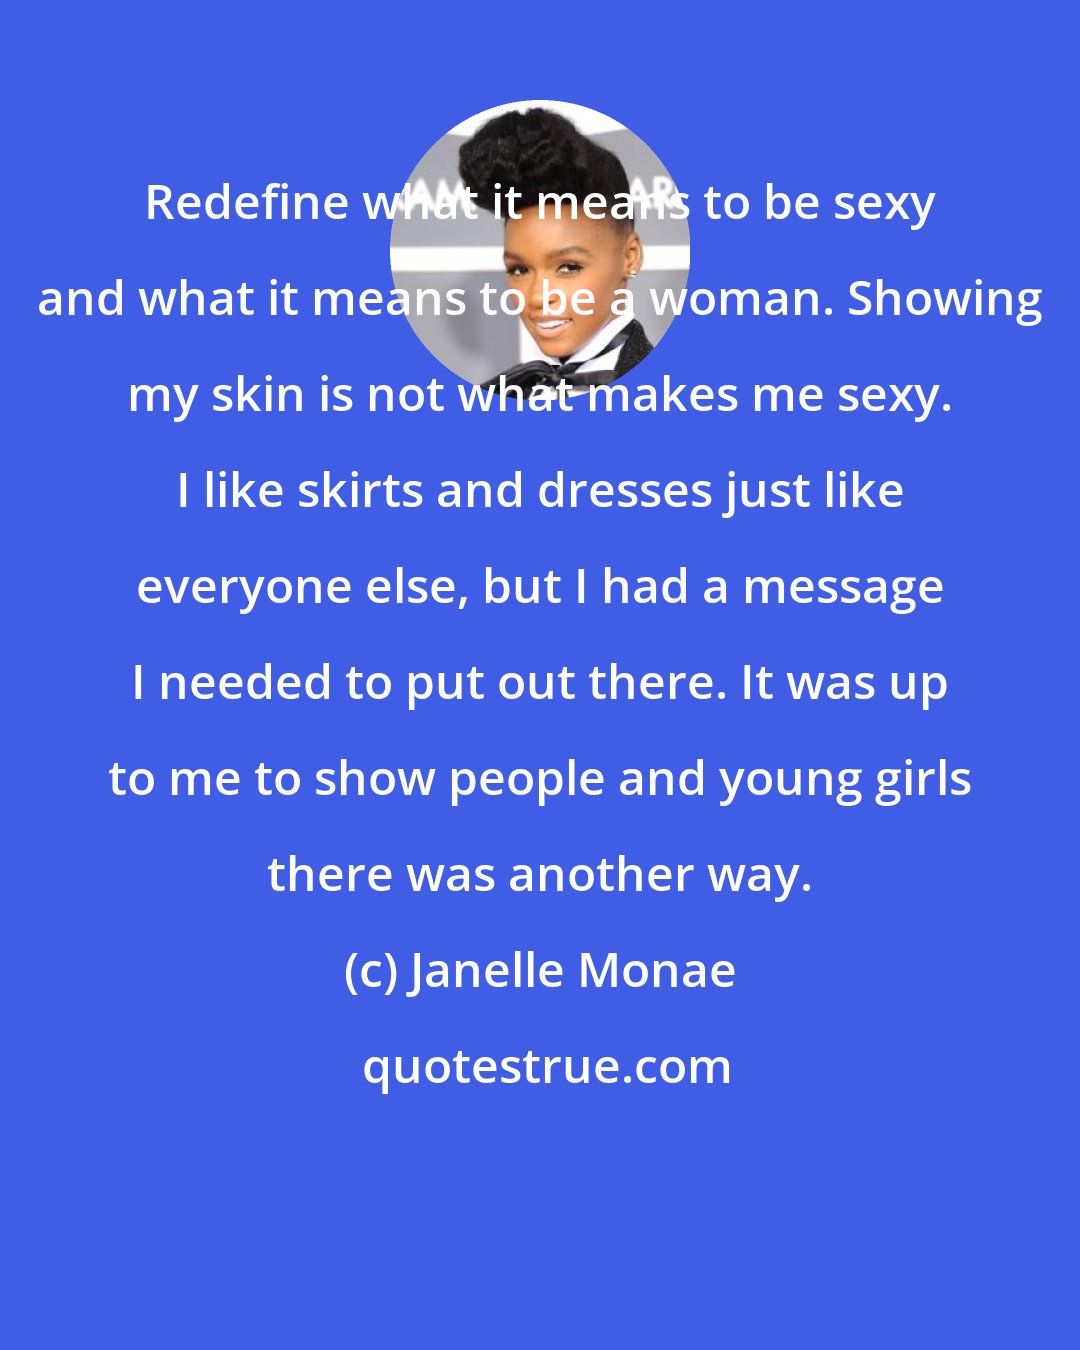 Janelle Monae: Redefine what it means to be sexy and what it means to be a woman. Showing my skin is not what makes me sexy. I like skirts and dresses just like everyone else, but I had a message I needed to put out there. It was up to me to show people and young girls there was another way.